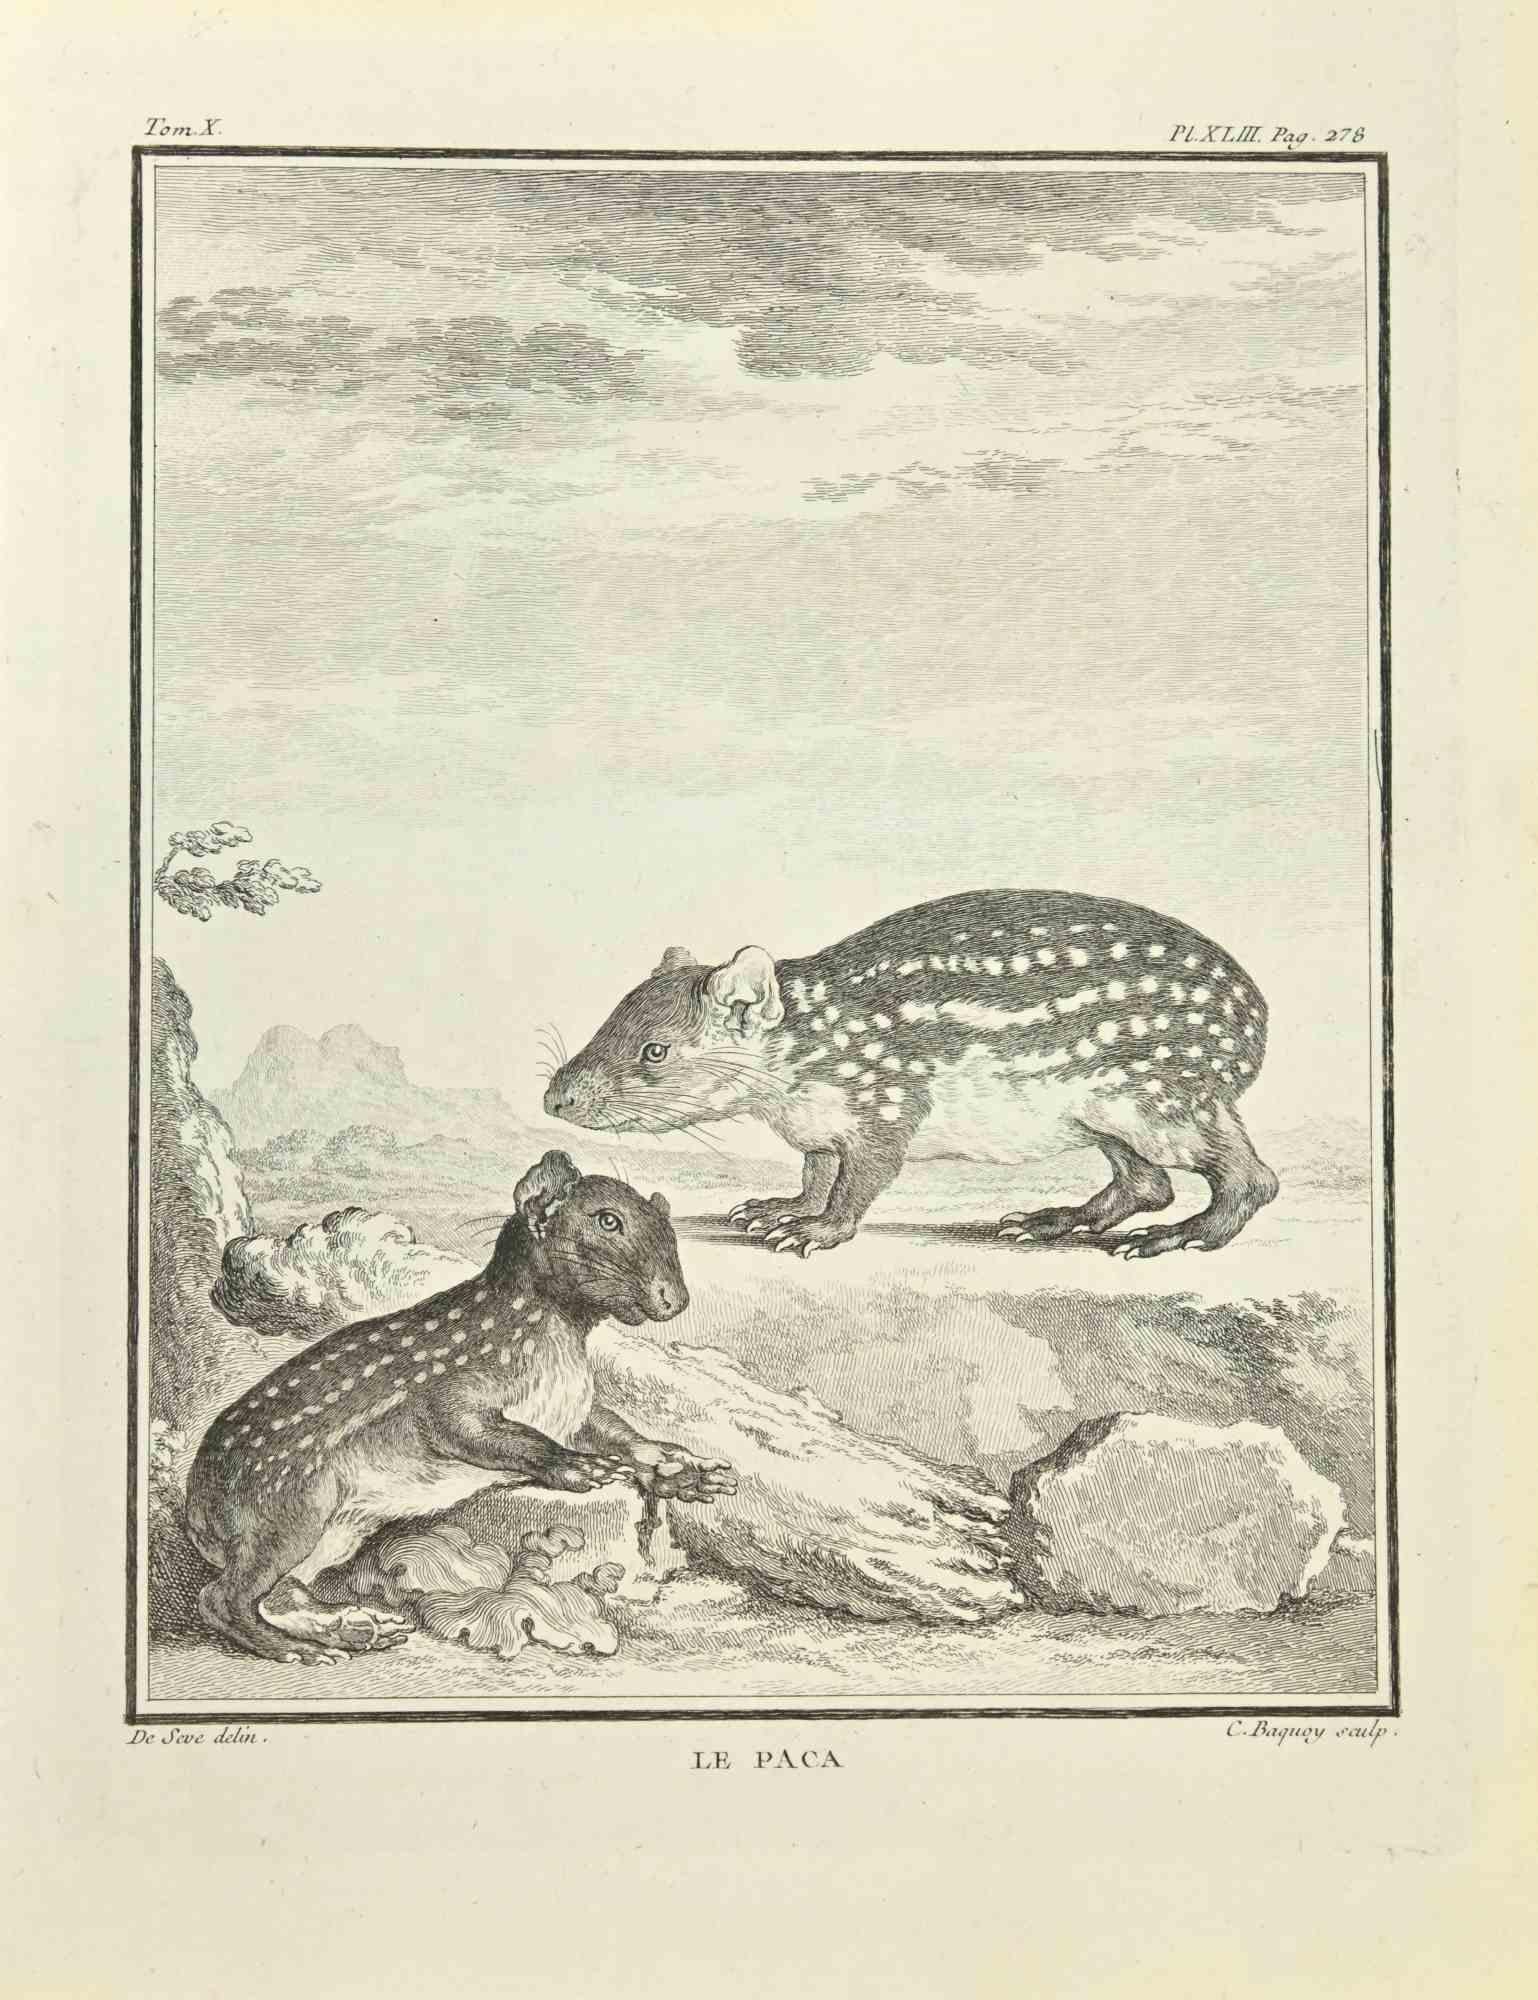 Le Paca is an etching realized by Jean Charles Baquoy in 1771.

It belongs to the suite "Histoire Naturelle de Buffon".

The Artist's signature is engraved lower right.

Good conditions.